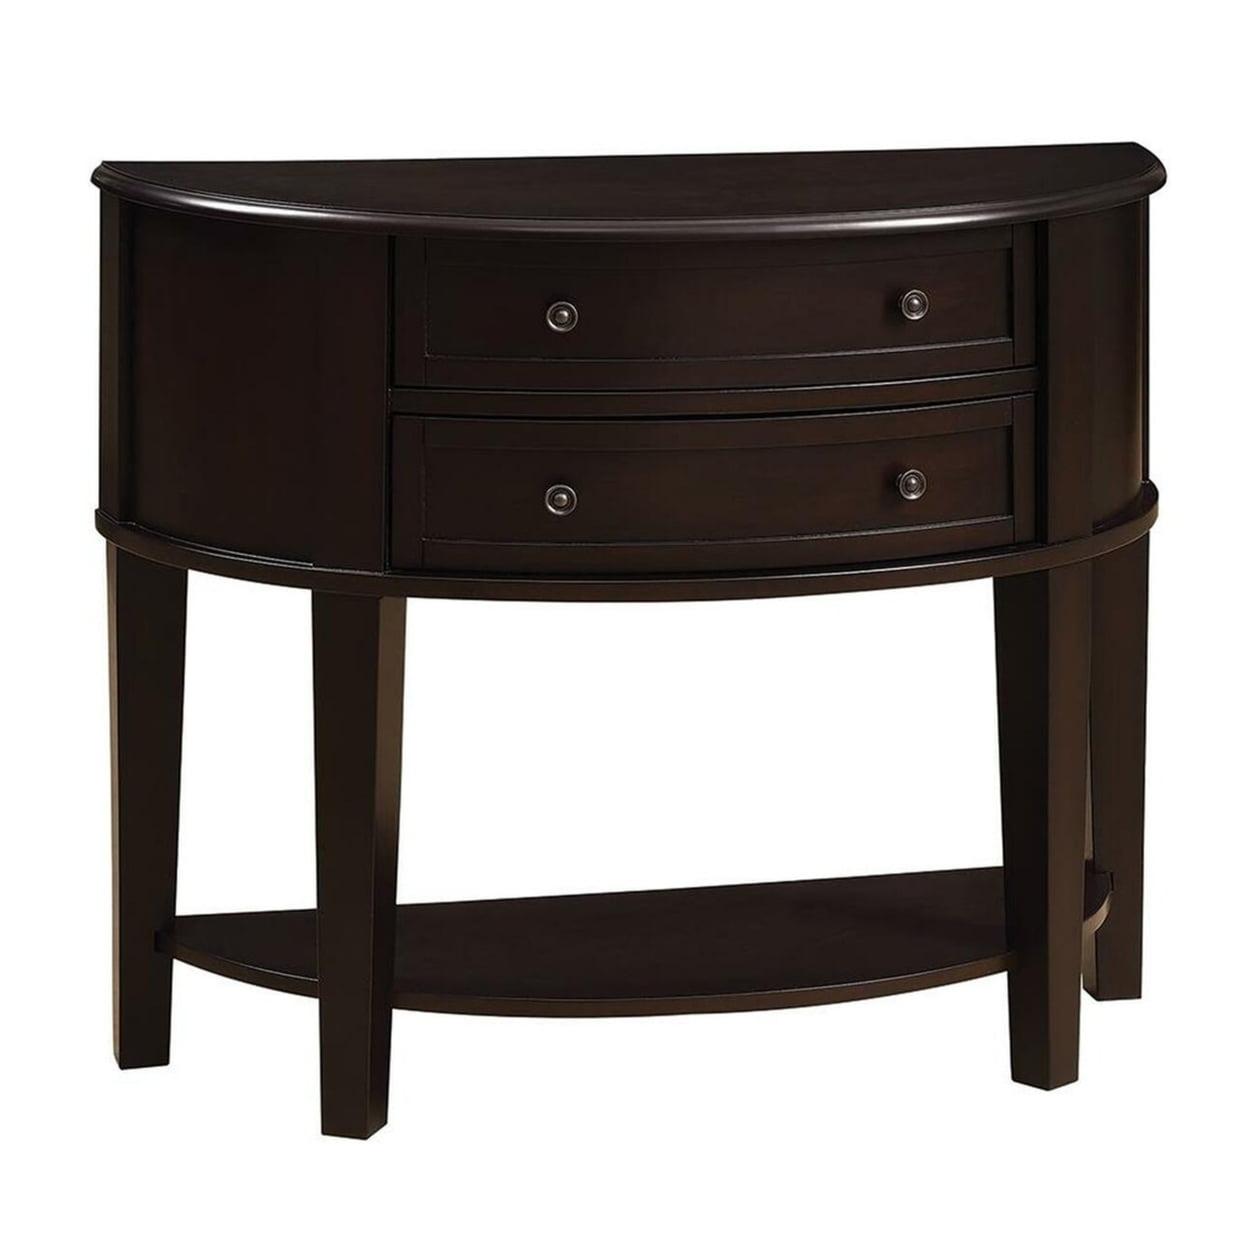 Transitional Brown Wood Demilune Console Table with Storage